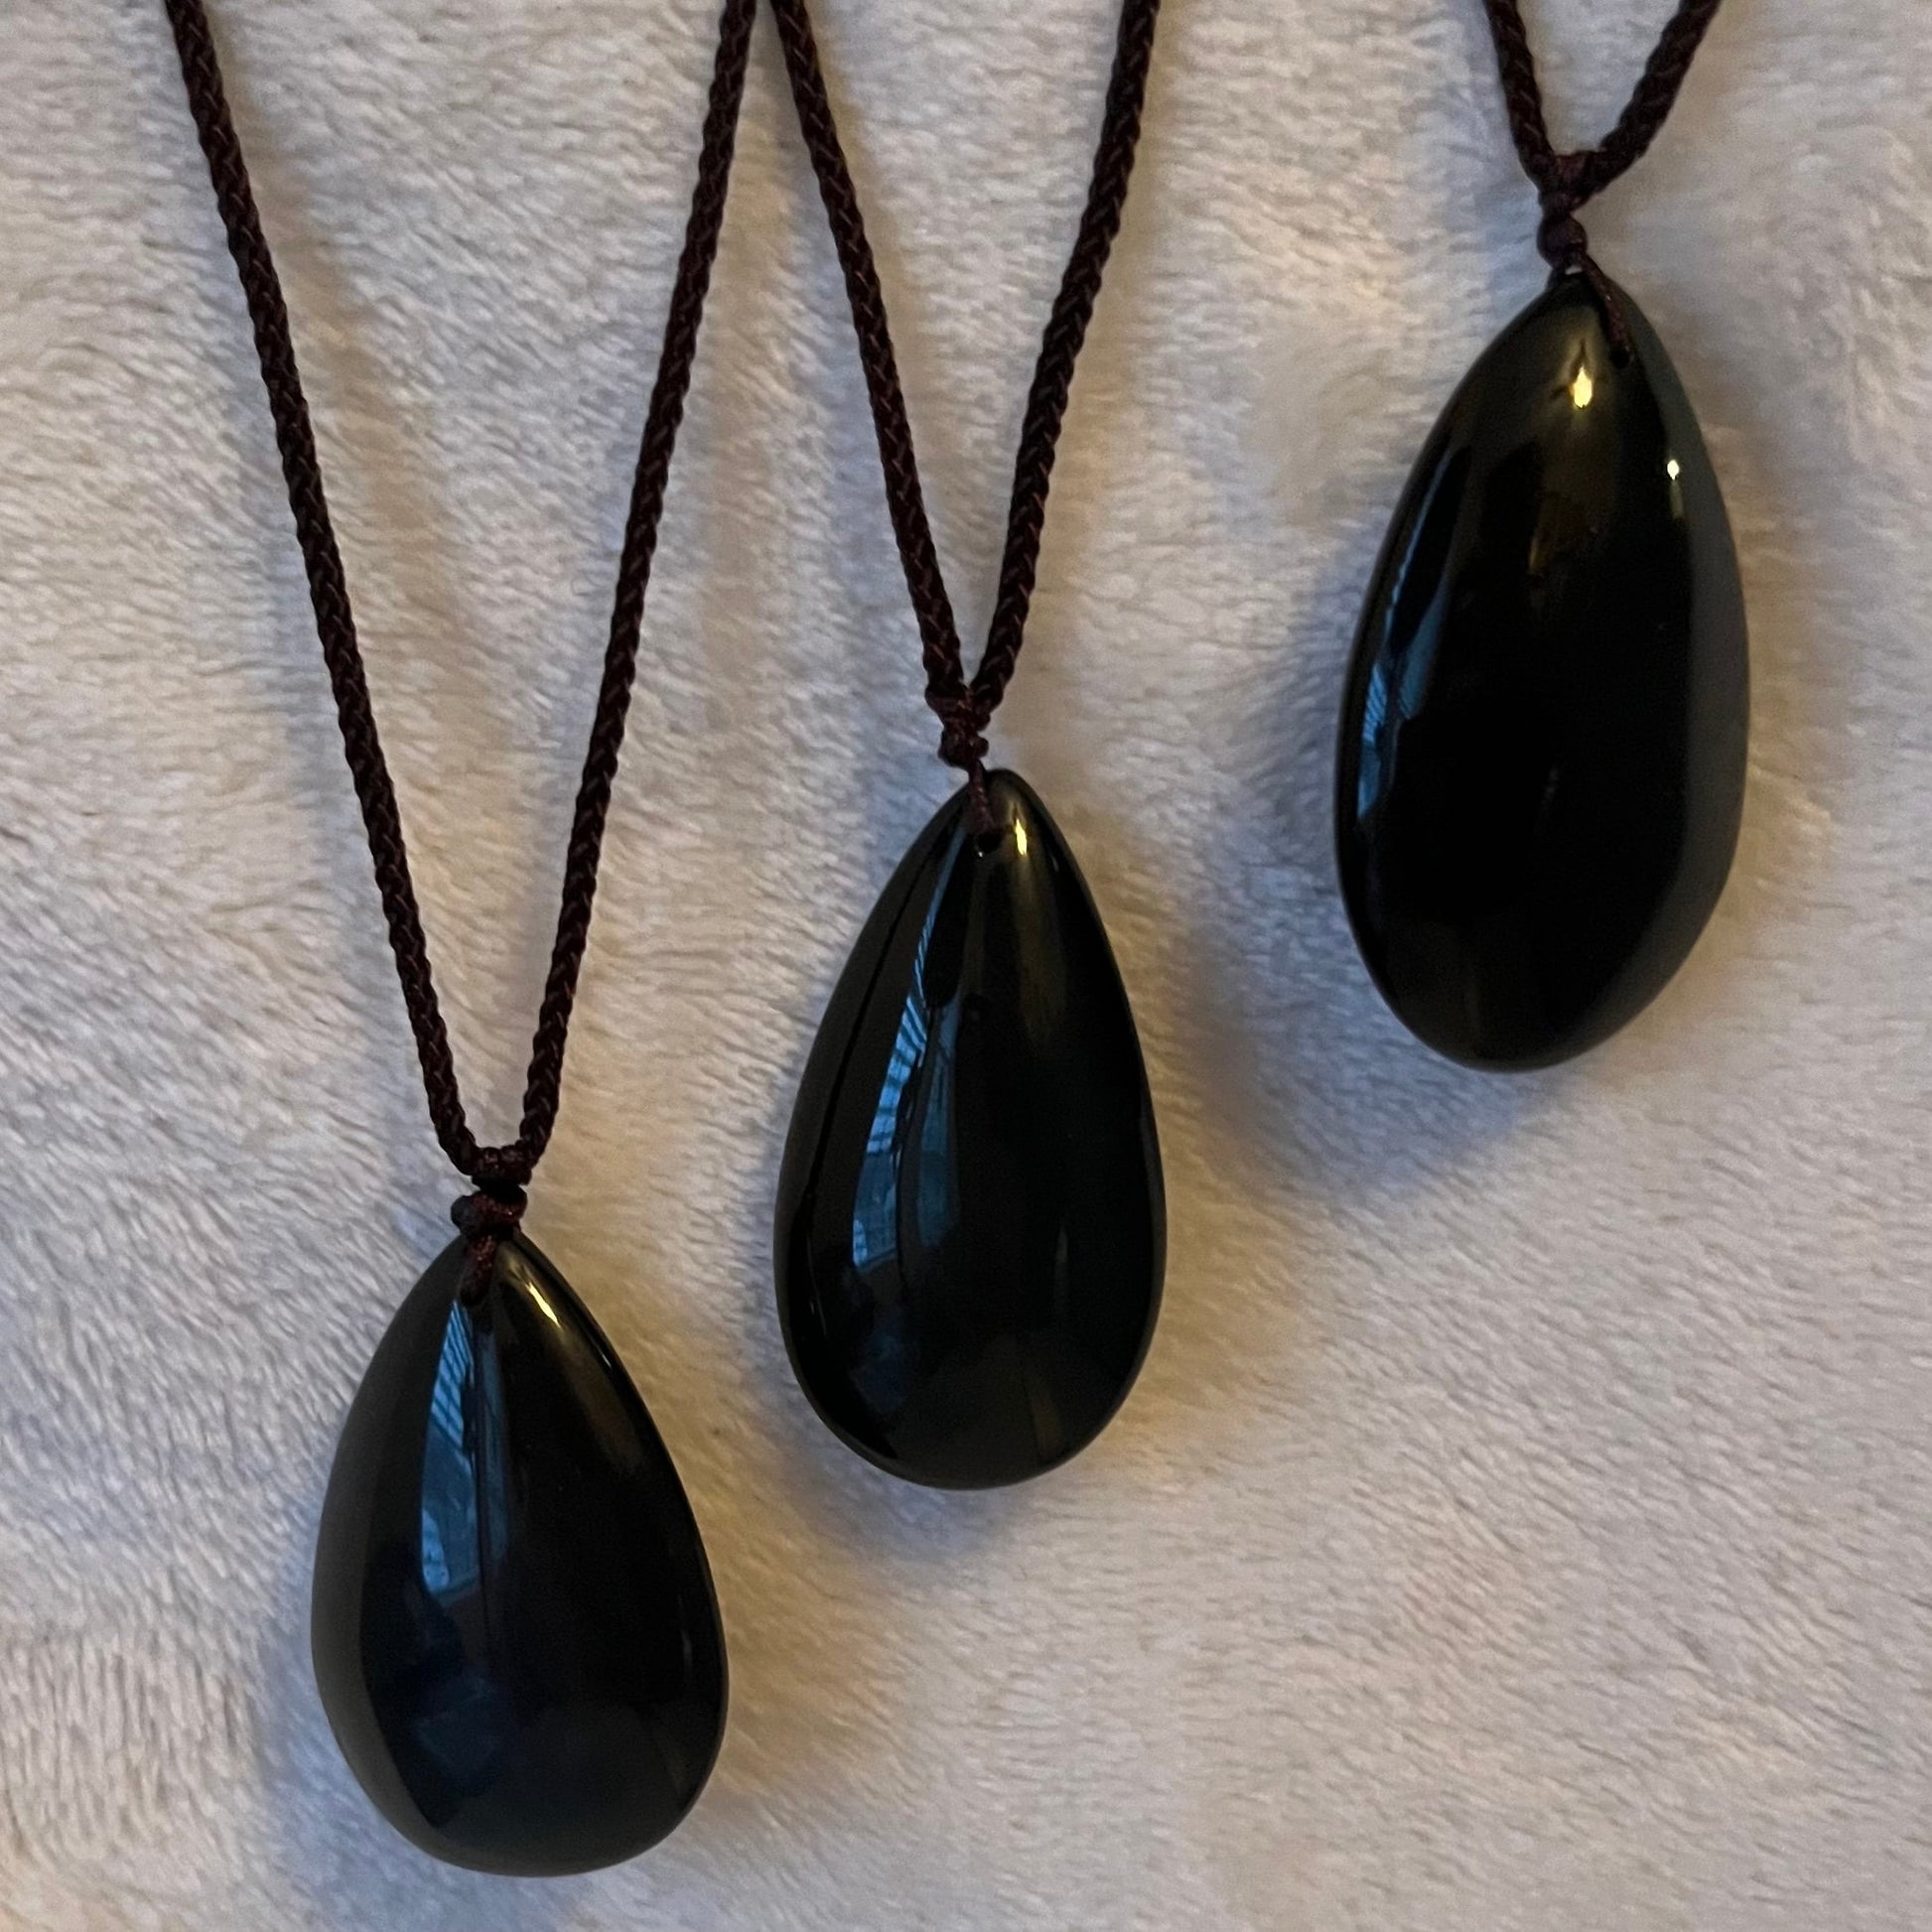 3 Iridescent rainbow obsidian tear drop pendant necklaces, showcasing a spectrum of captivating hues, gracefully hung from adjustable cords for a touch of mystical beauty."